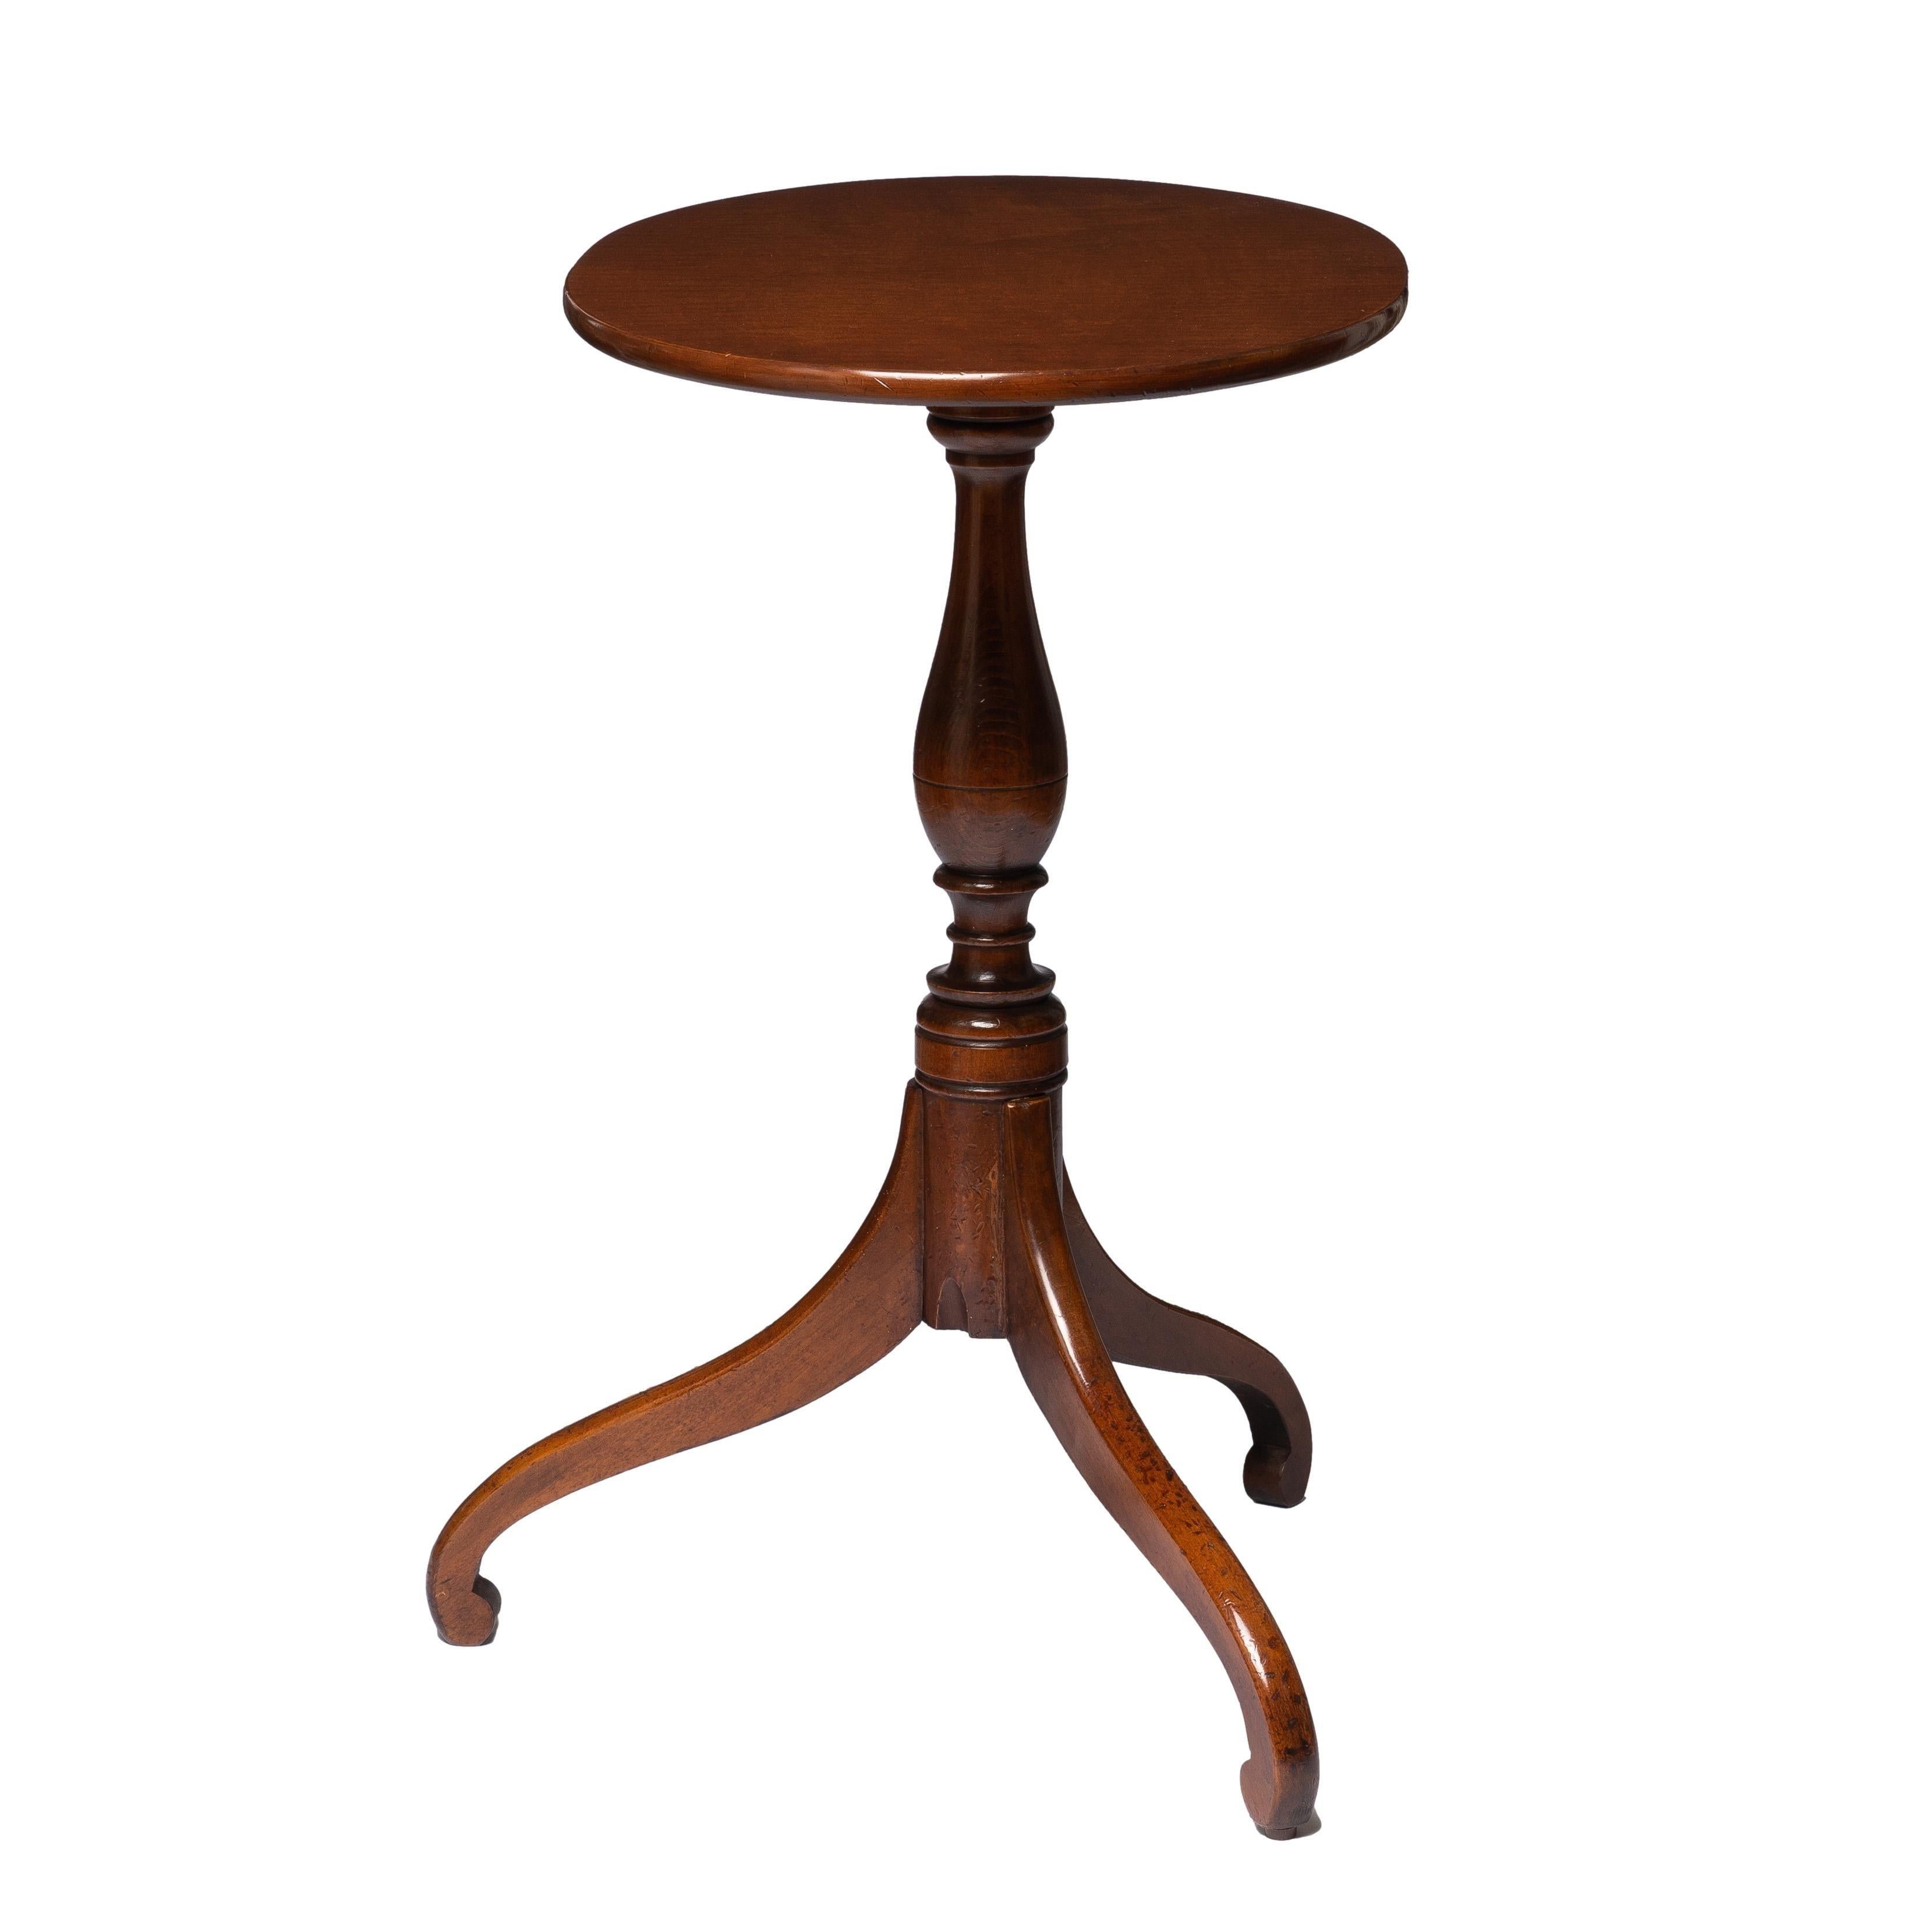 American cherry Hepplewhite tripod spider leg candle stand with an exceptionally figured curly maple veneered oval top.

American, Connecticut Valley, circa 1800.